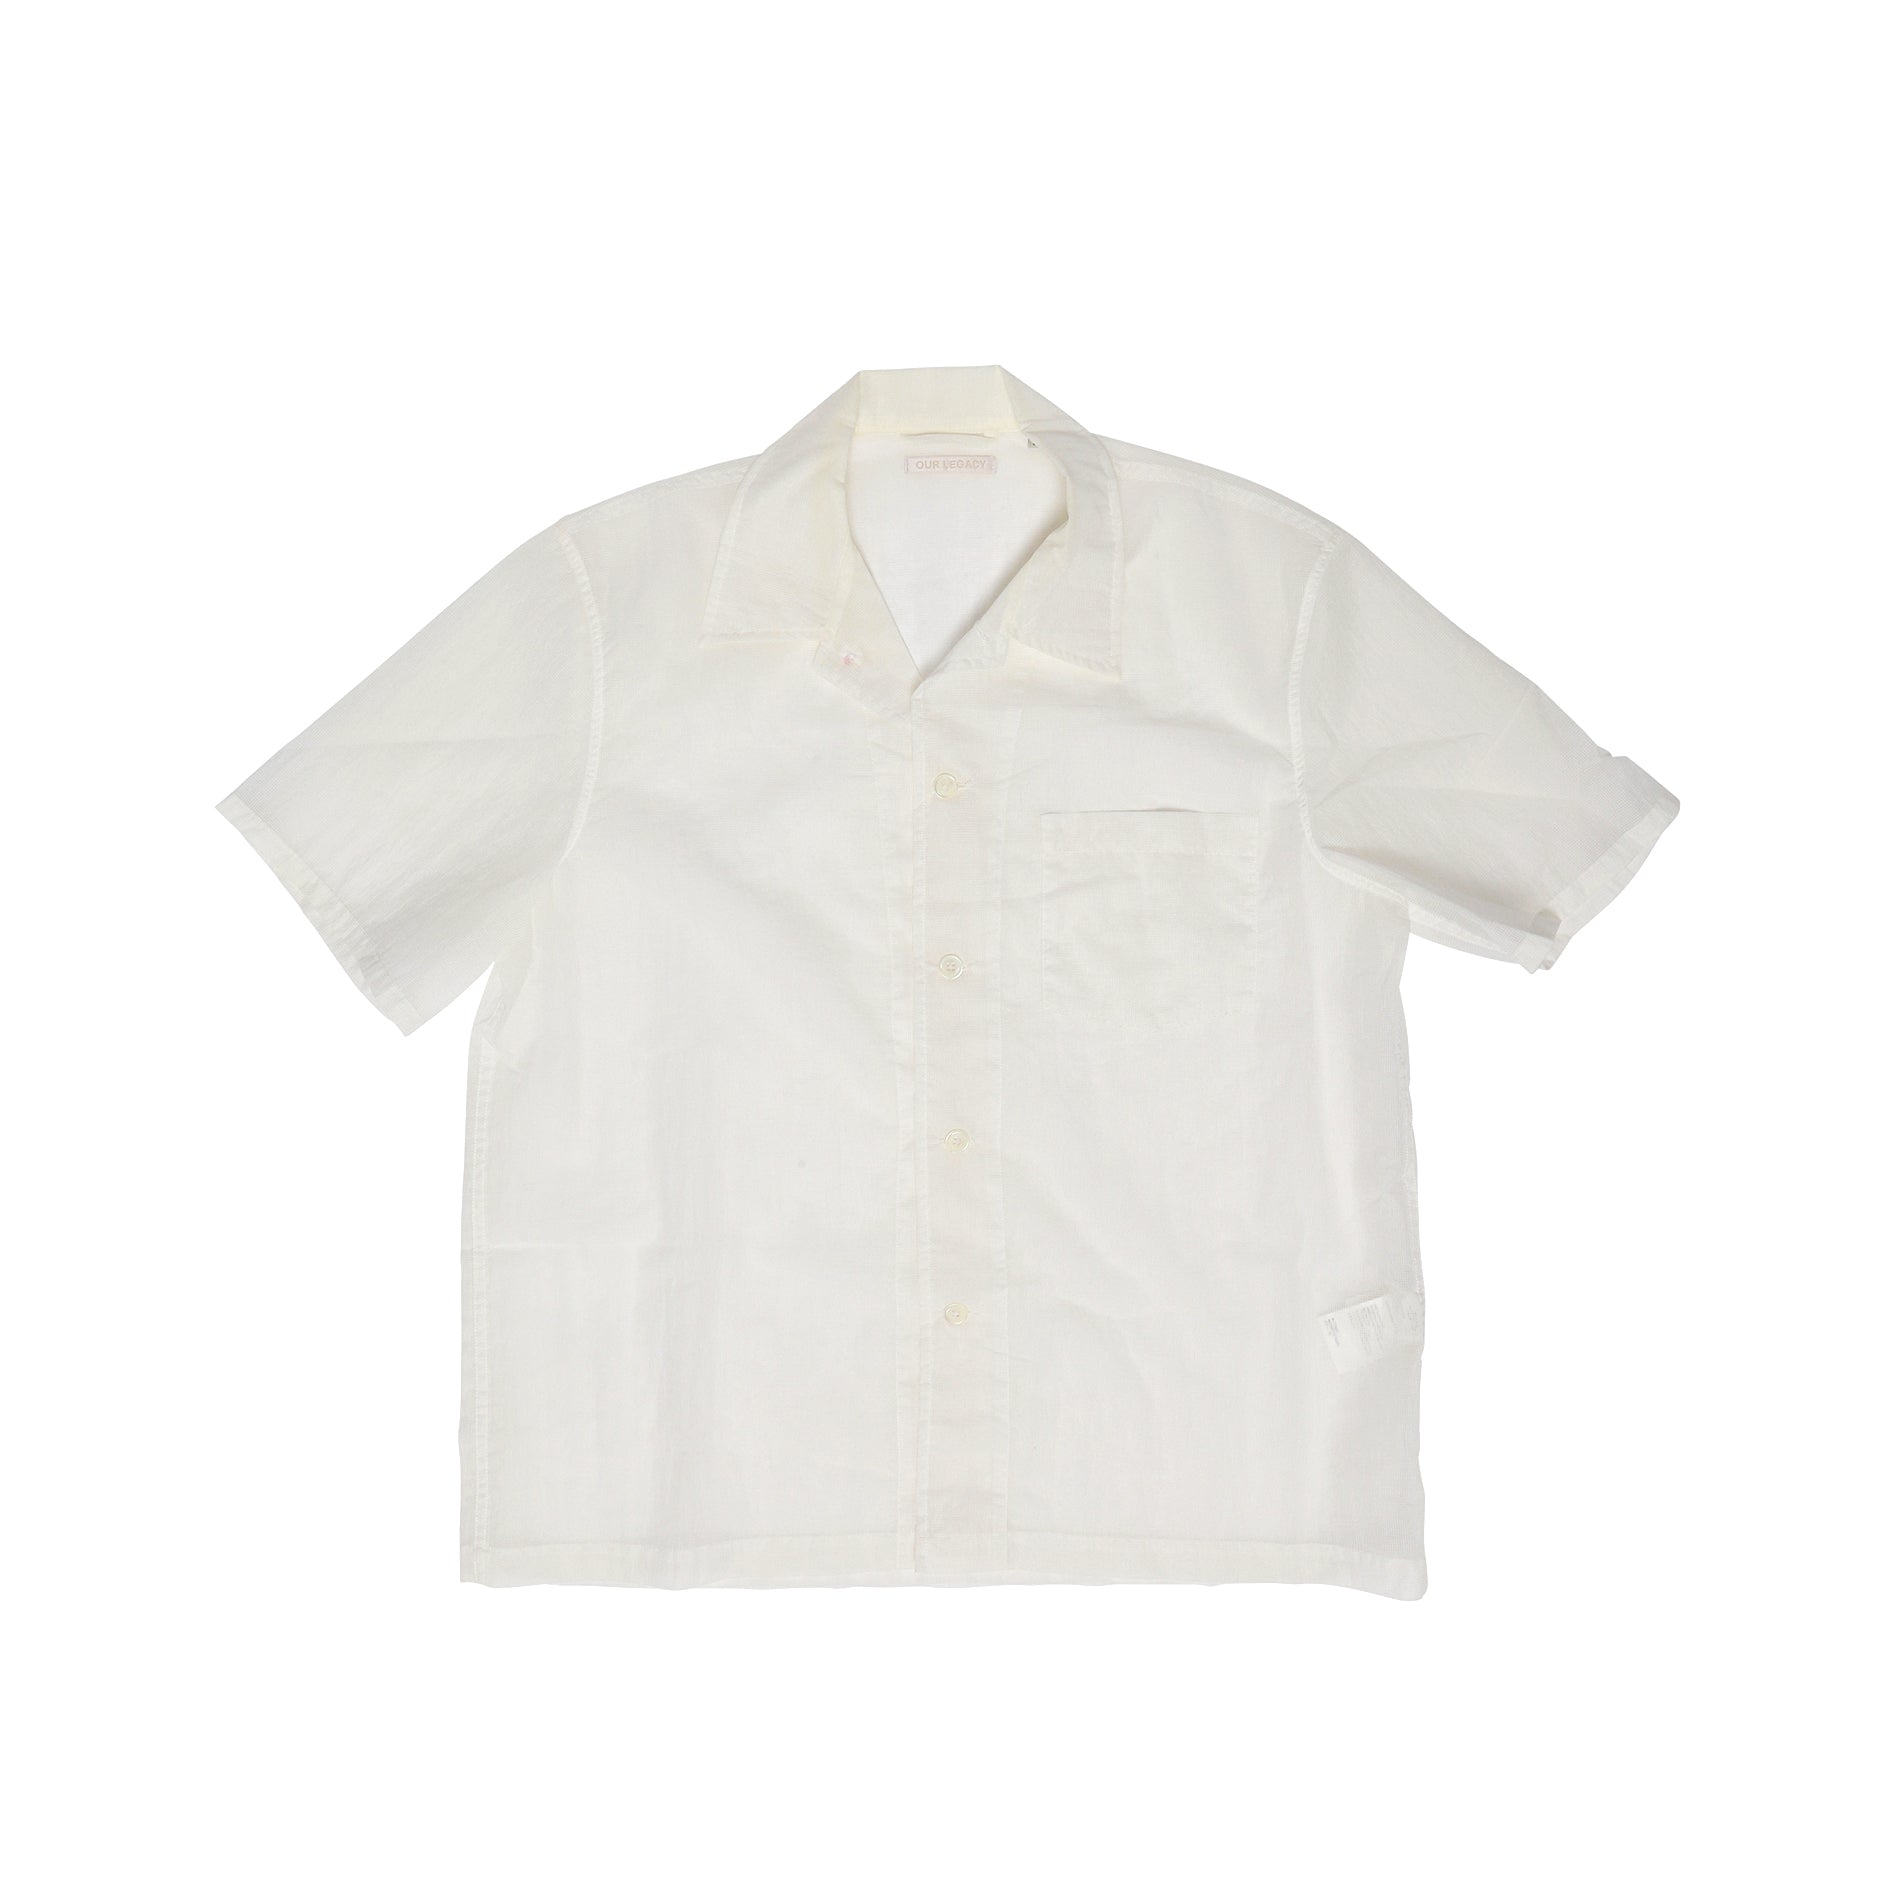 Our Legacy Ripstop Short Sleeve Shirt